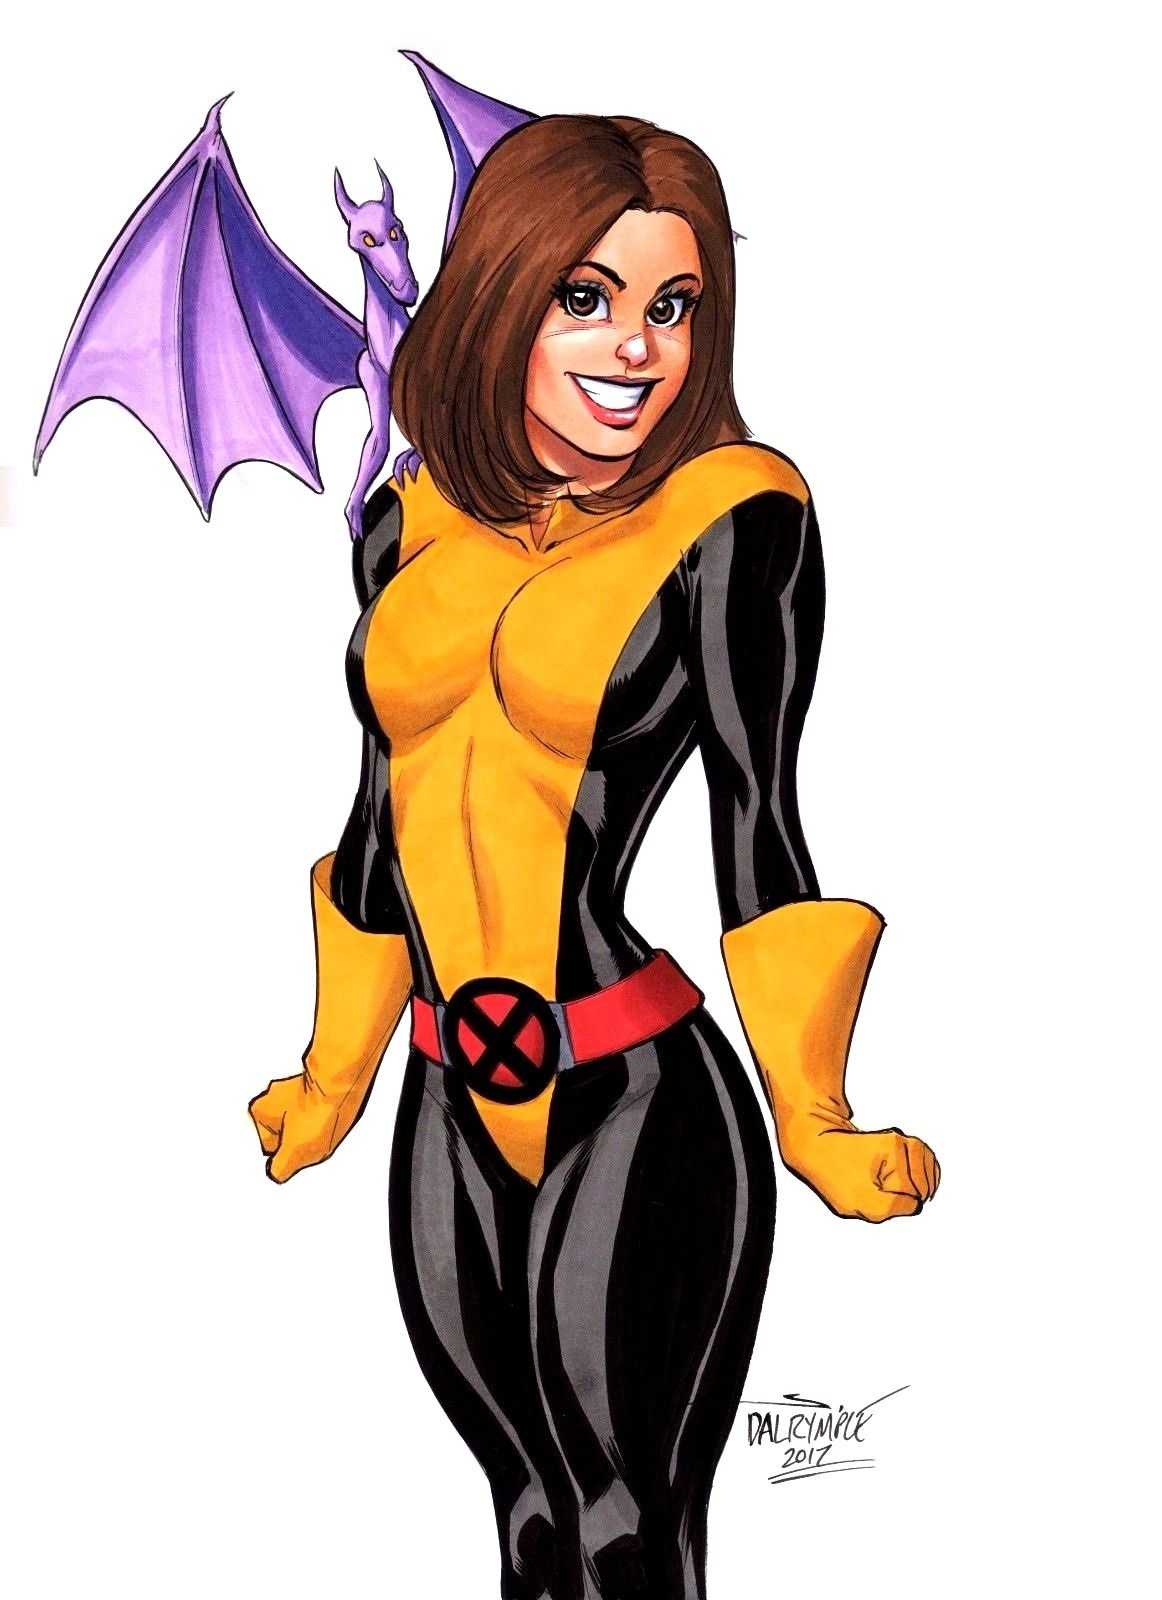 51 Hot Pictures Of Kitty Pryde That Will Make Your Heart Pound For Her 43